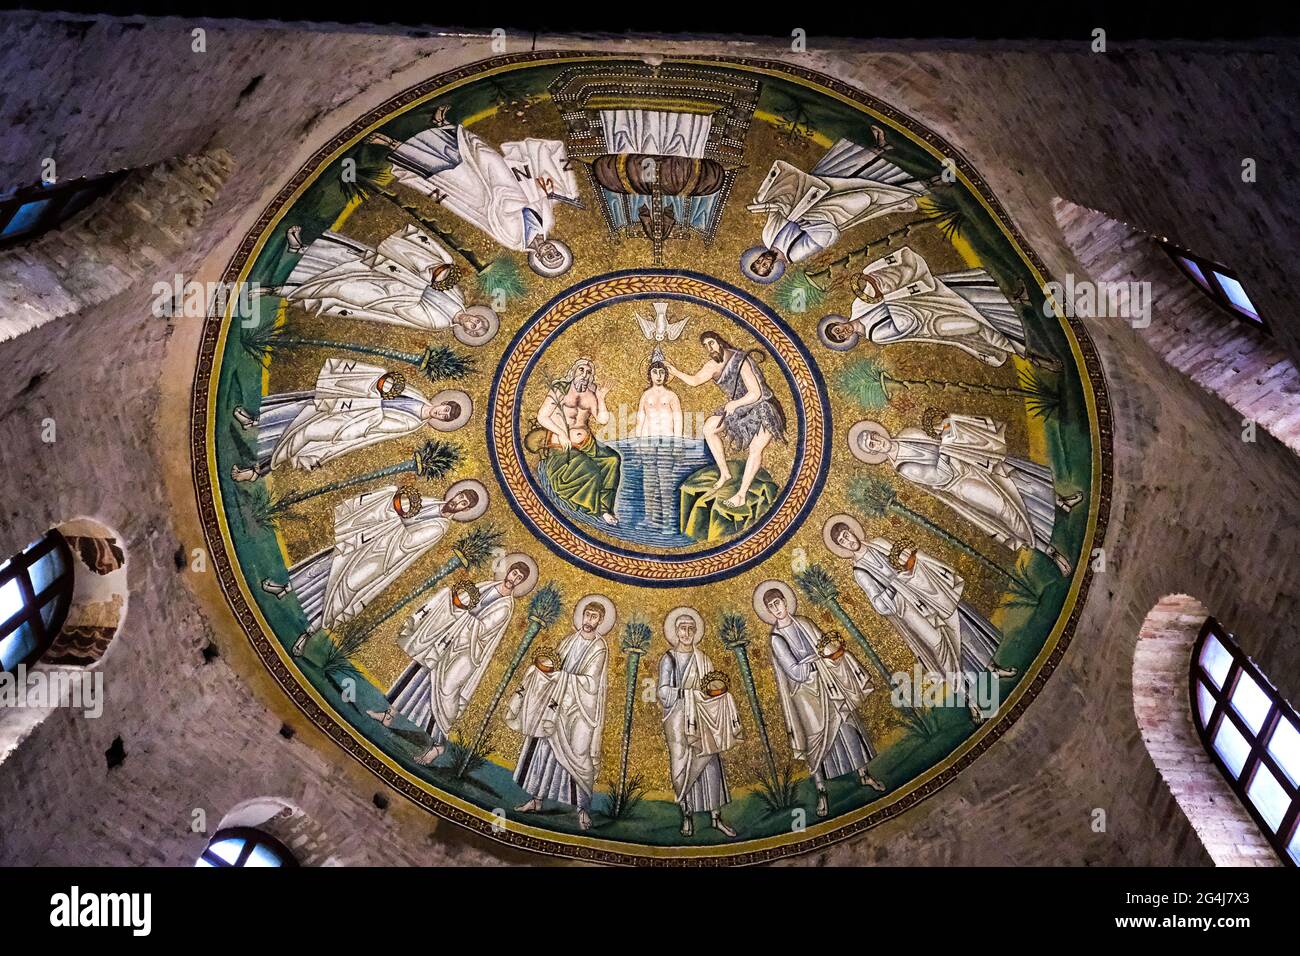 Mosaics in the Arian Baptistery depicting the Baptism of Jesus by Saint John the Baptist in Ravenna Italy Stock Photo